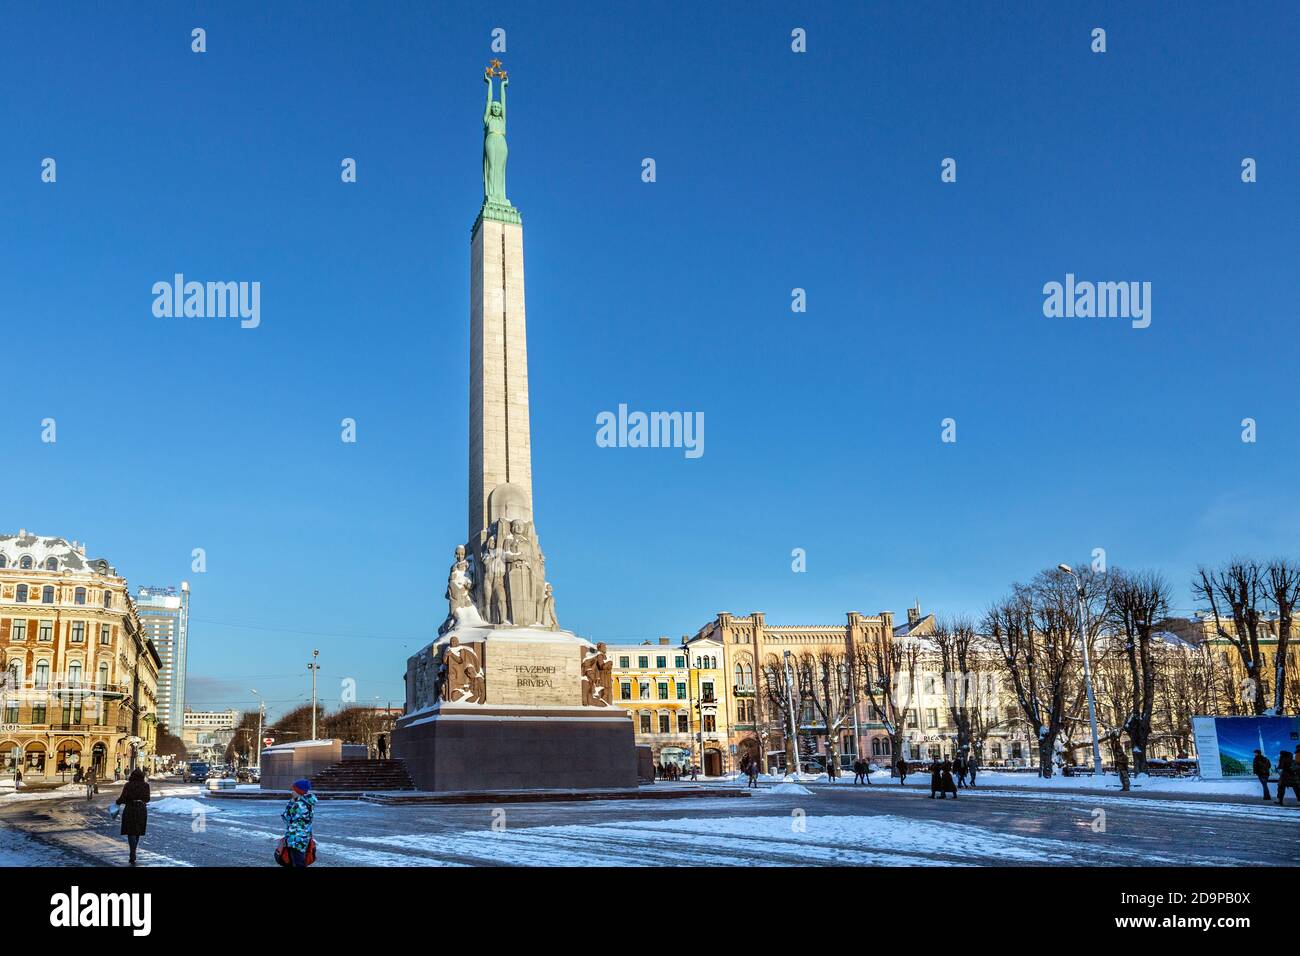 The Freedom Monument in Riga, capital of Latvia, in the Baltic region of northern Europe. Latvia has not enjoyed long periods of absolute freedom. Stock Photo